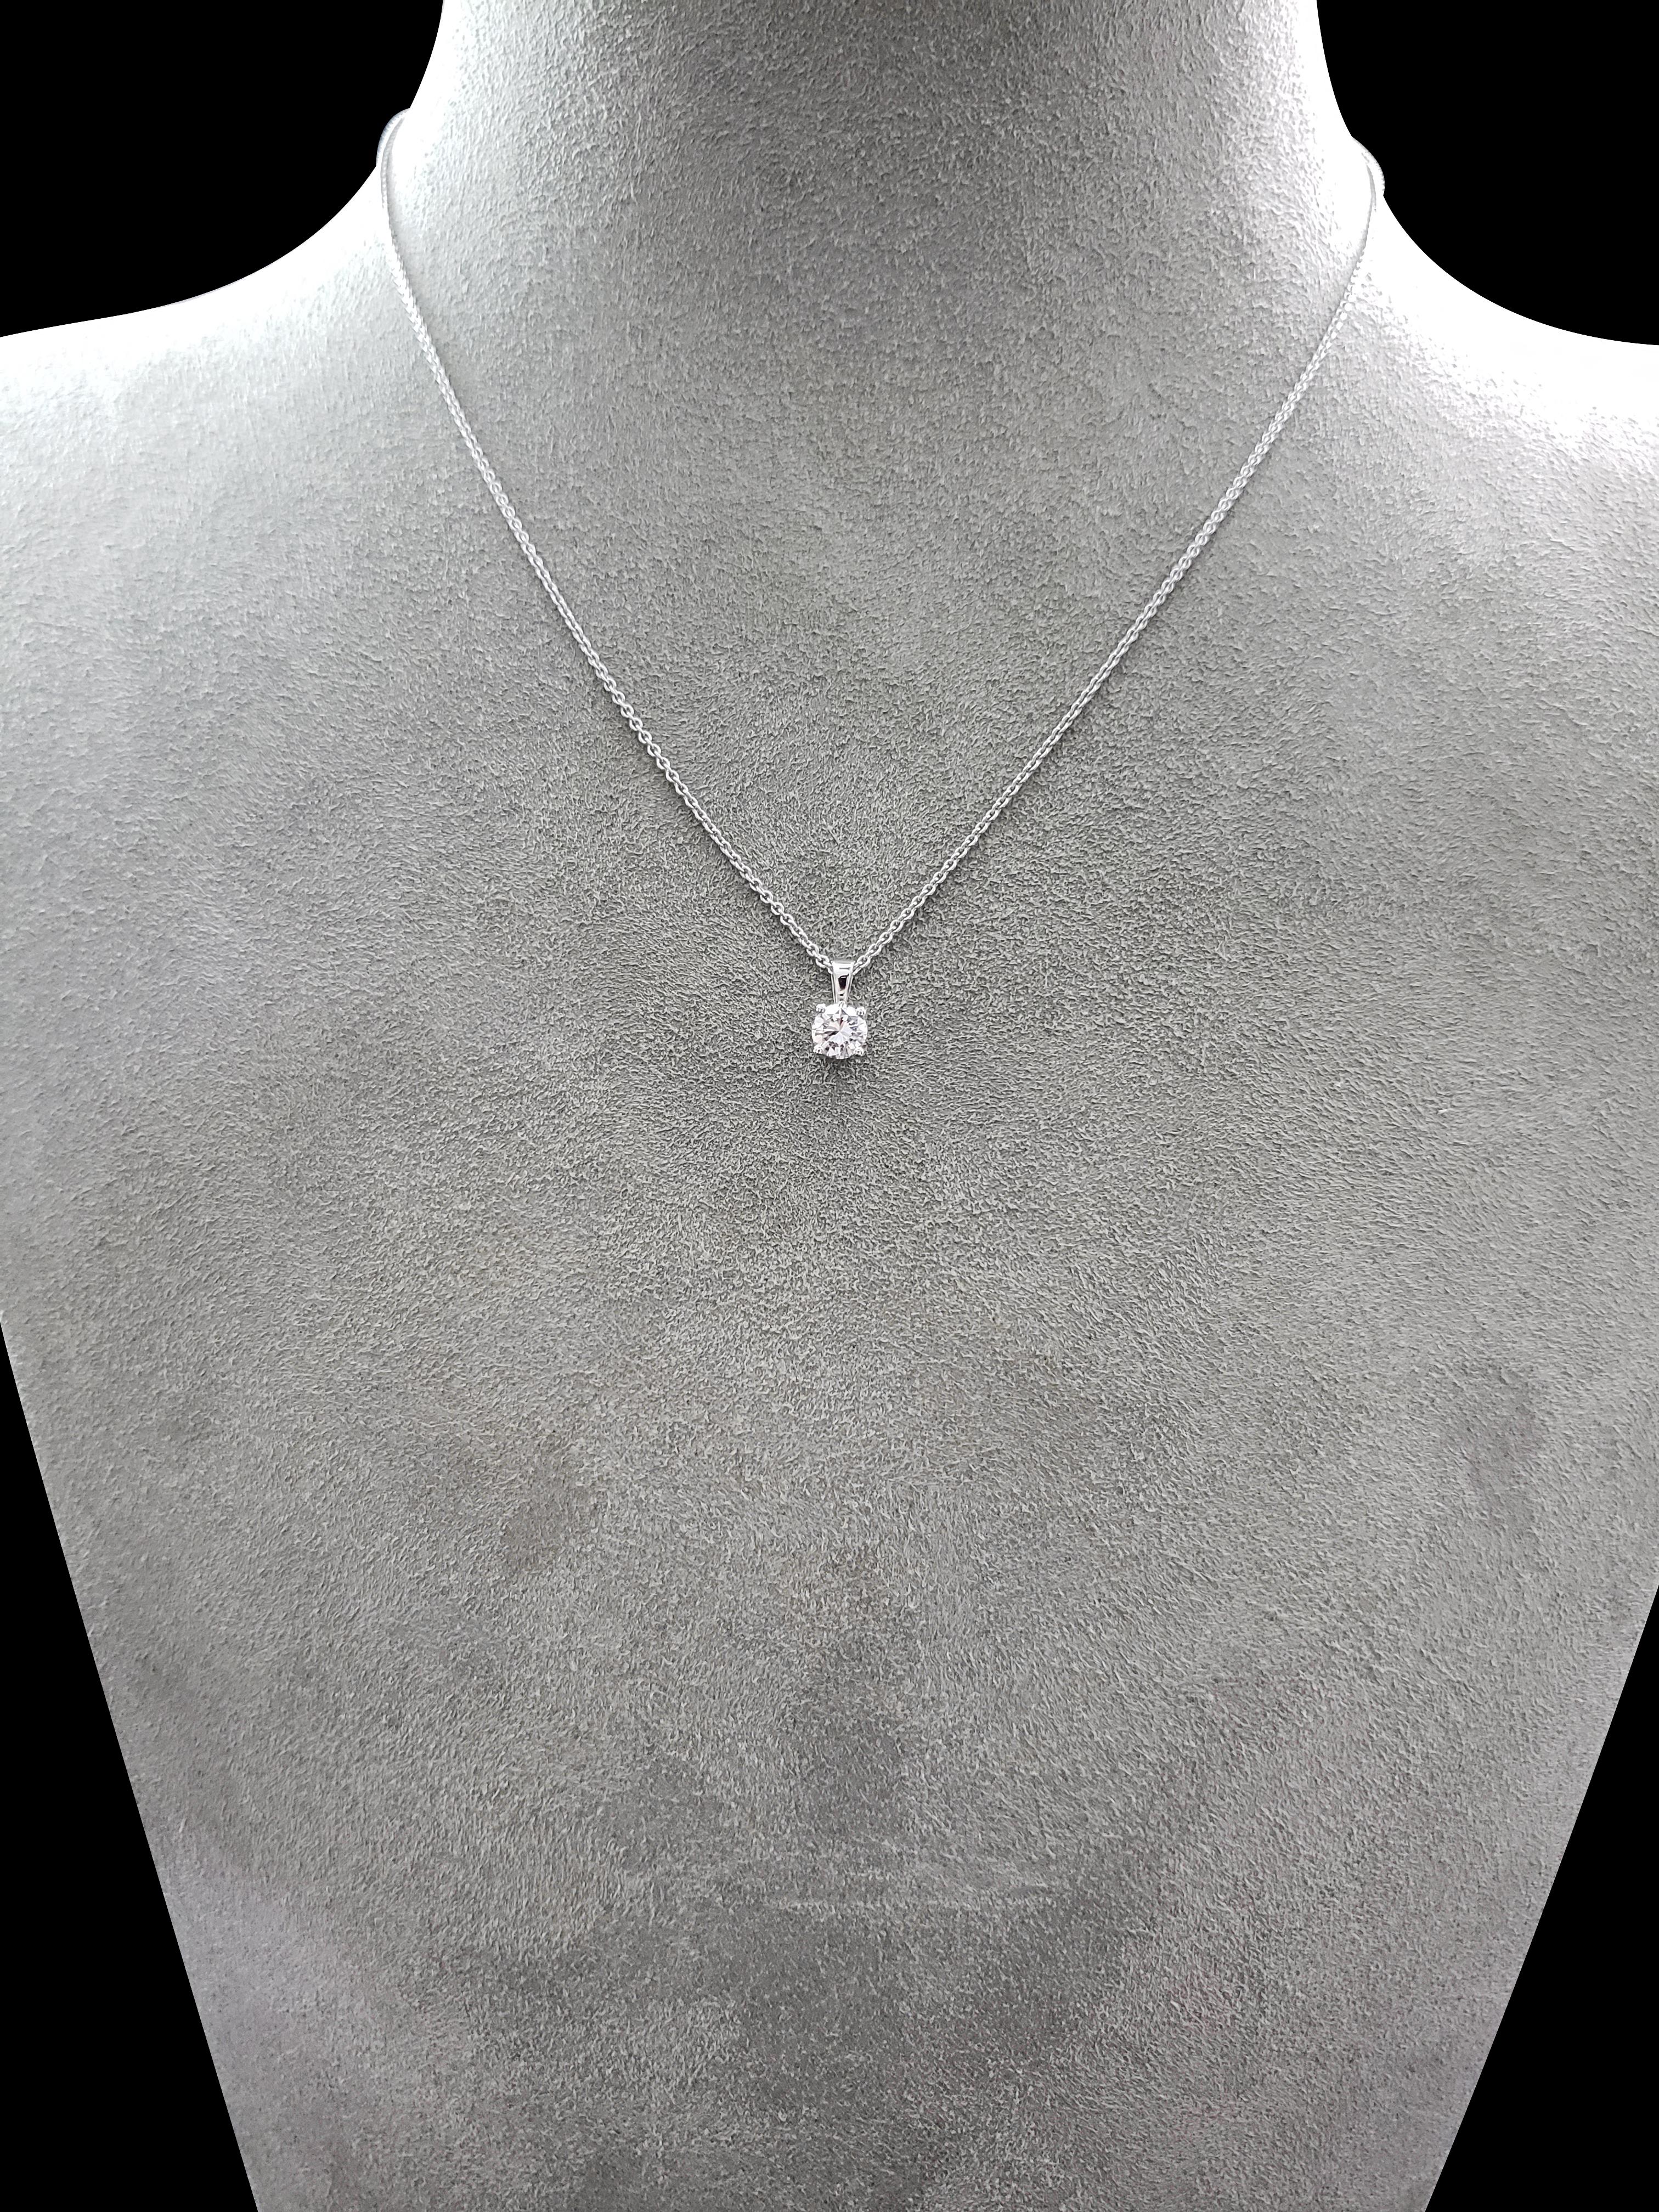 A simple and timeless 18 karat white gold pendant showcasing a single 0.40 carat round brilliant diamond in a 4 prong basket. The diamond is suspended on a standard bale attached to a 16 inch white gold chain (adjustable upon request).

Style